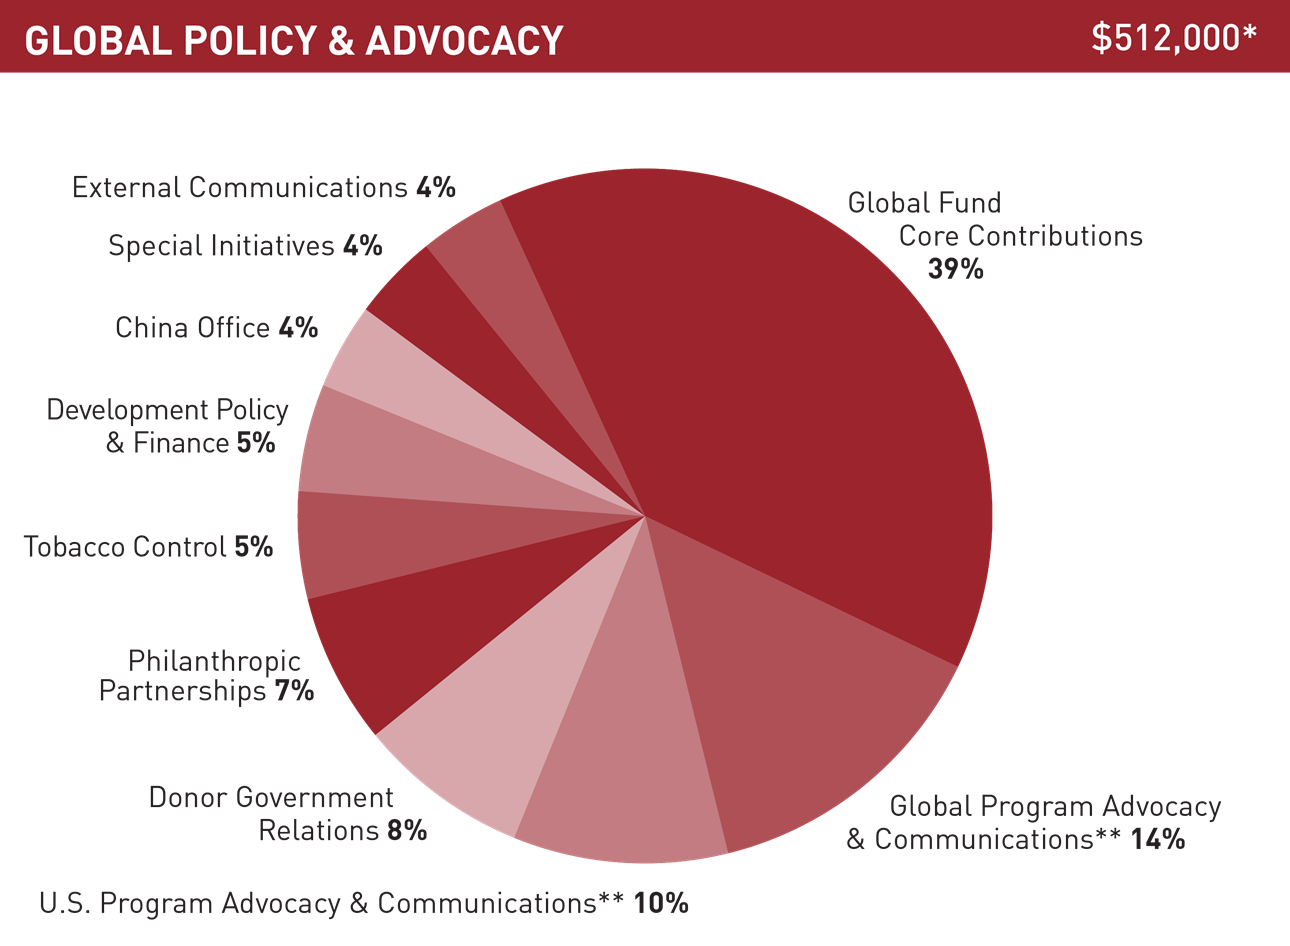 Gates Foundation Annual Report 2019 Global Policy and Advocacy